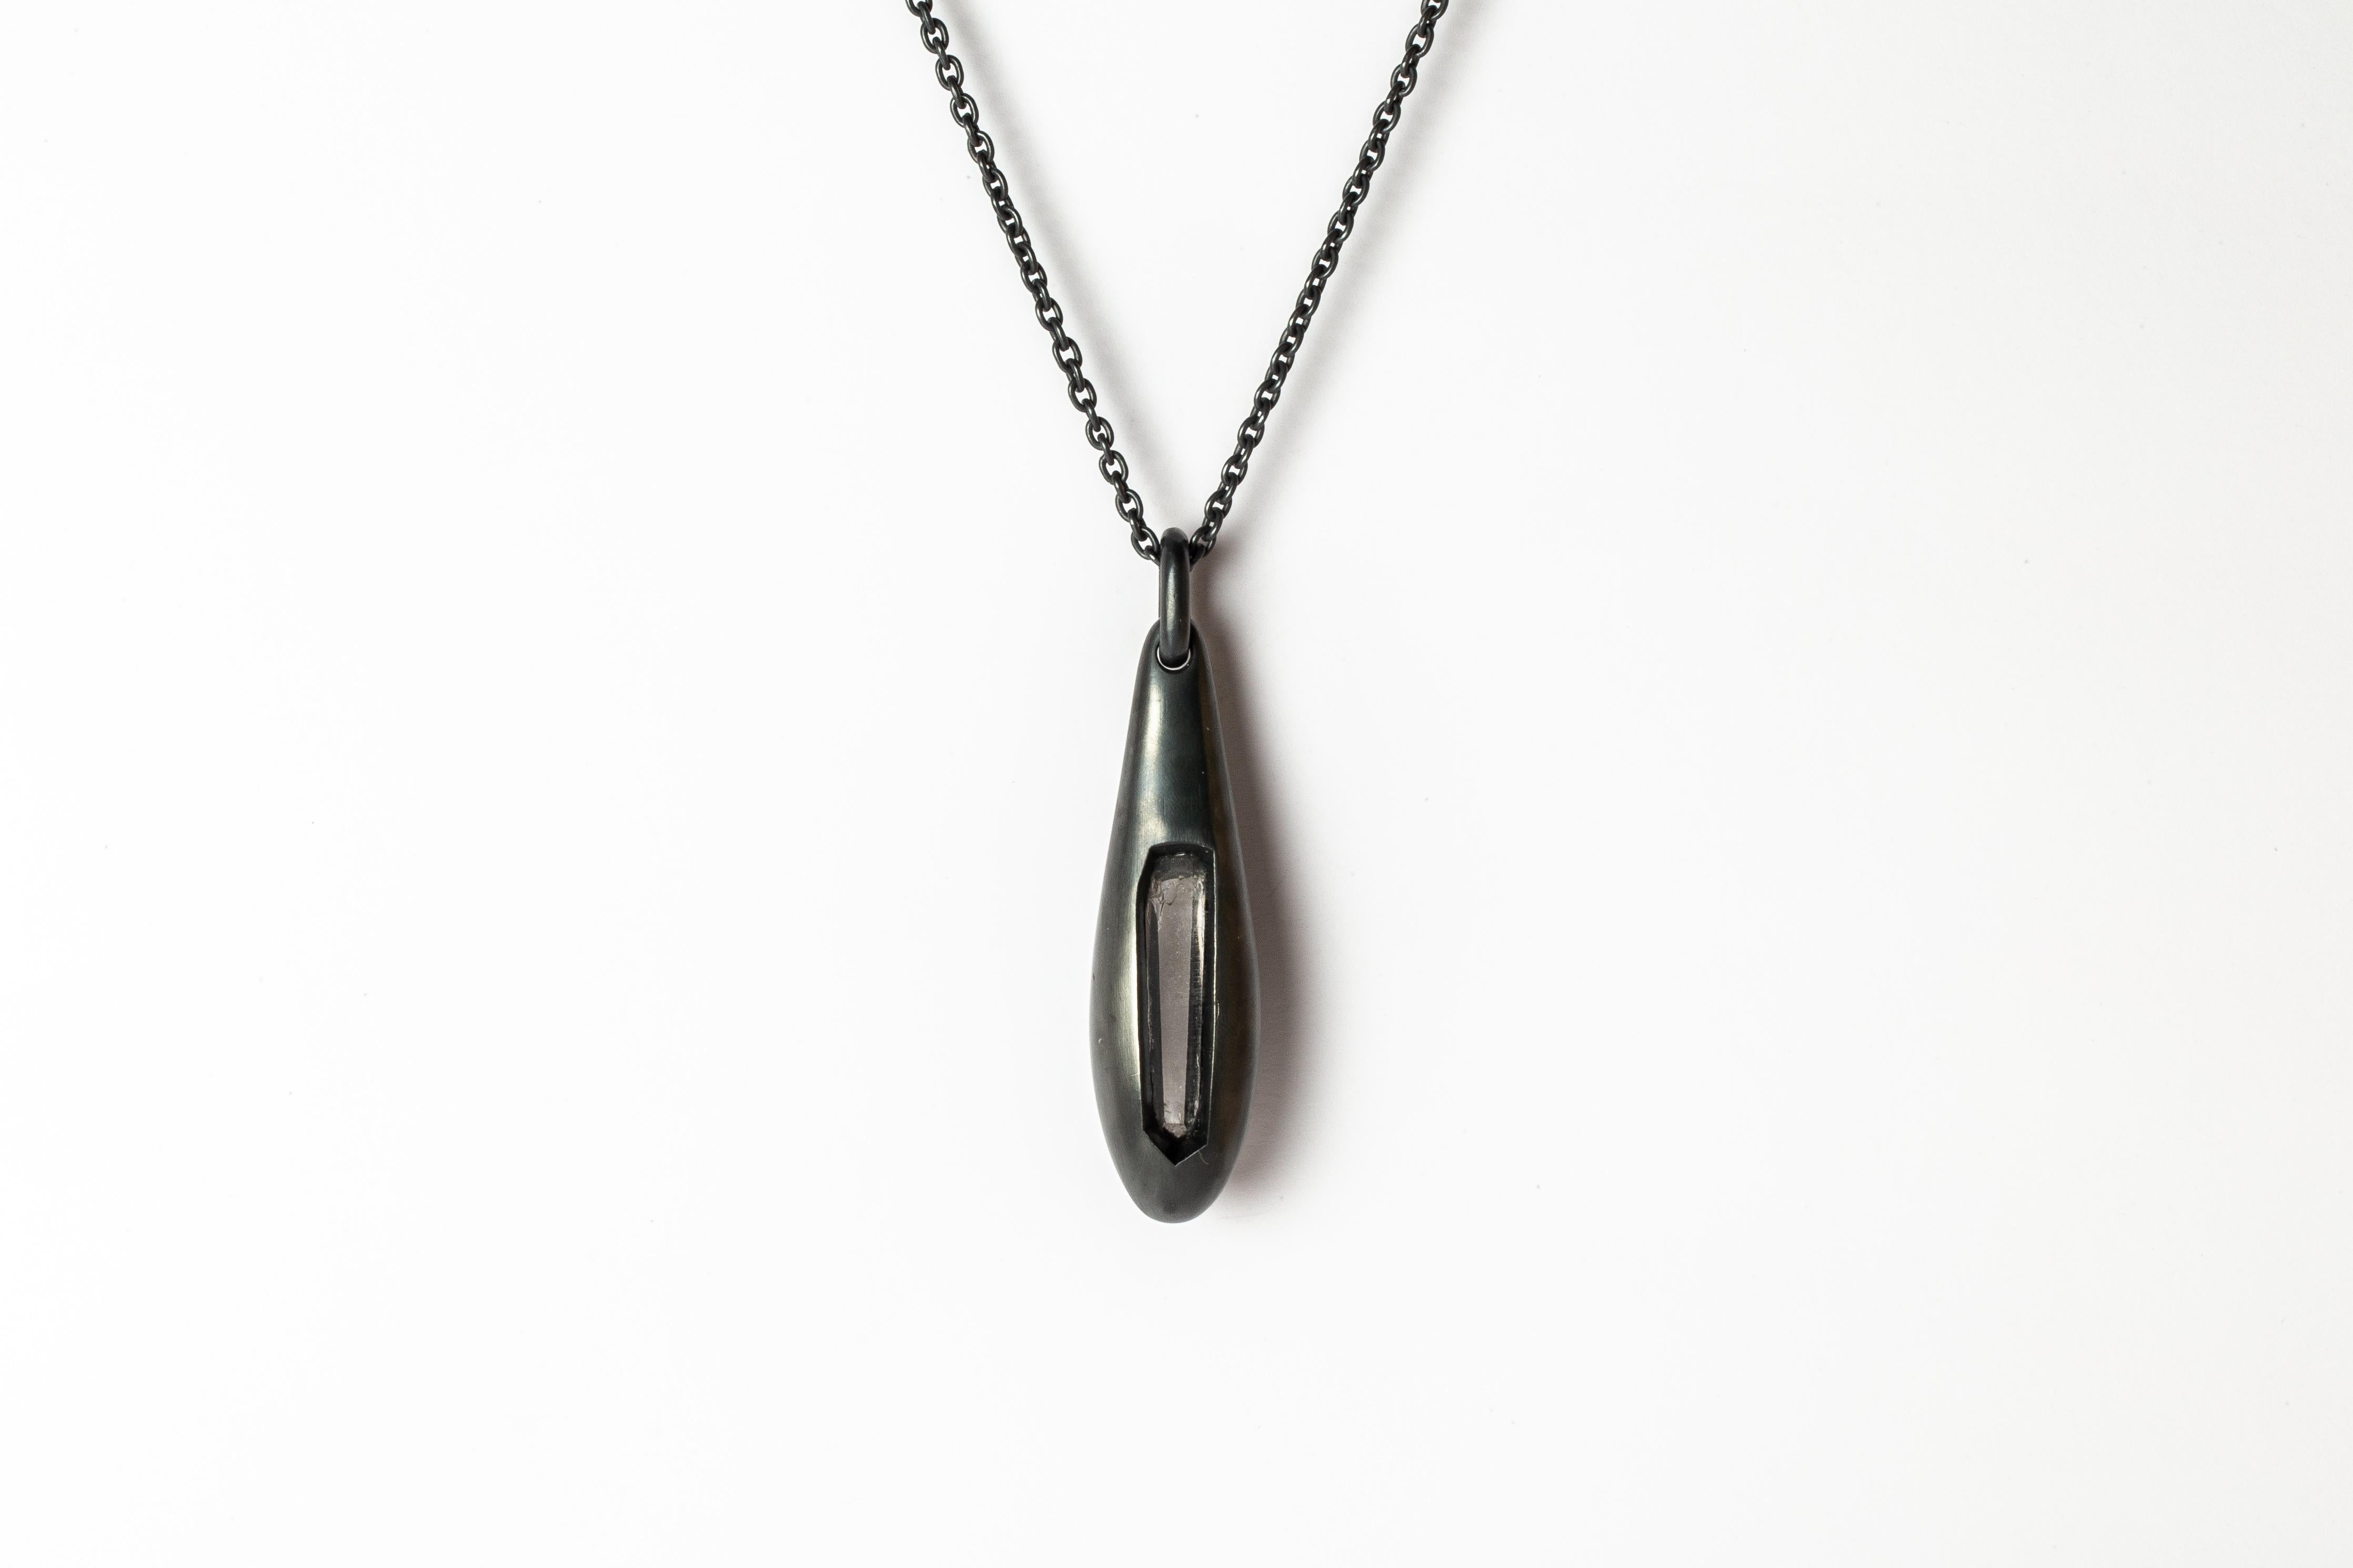 Necklace in the shape of chrysalis made in oxidized sterling silver and a slab of lemurian quartz. It comes on a 74 cm sterling silver chain. Each piece a unique and this is what makes it special.